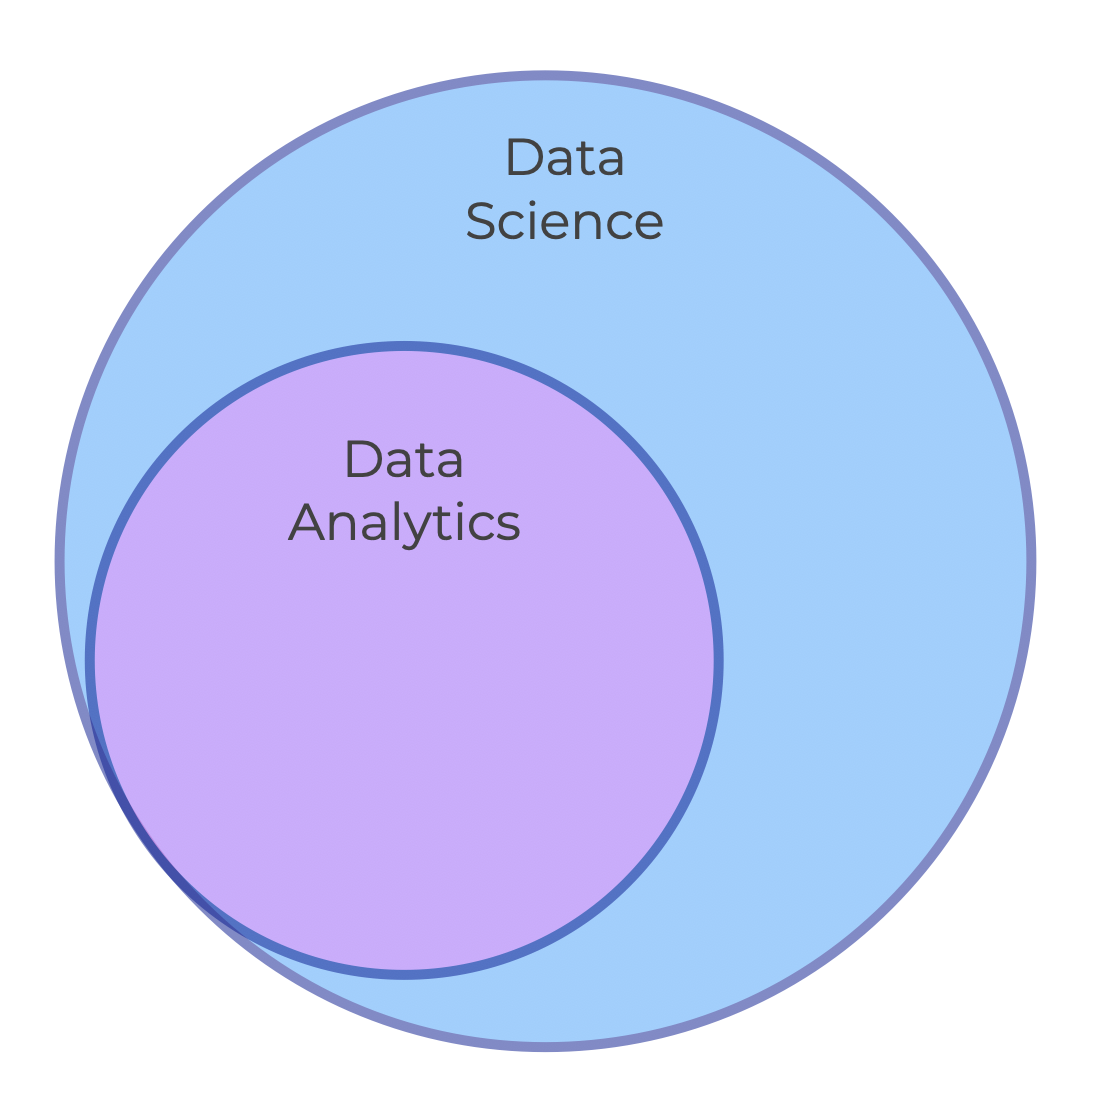 An image of a Venn diagram that shows how data analytics is a subset of data science.